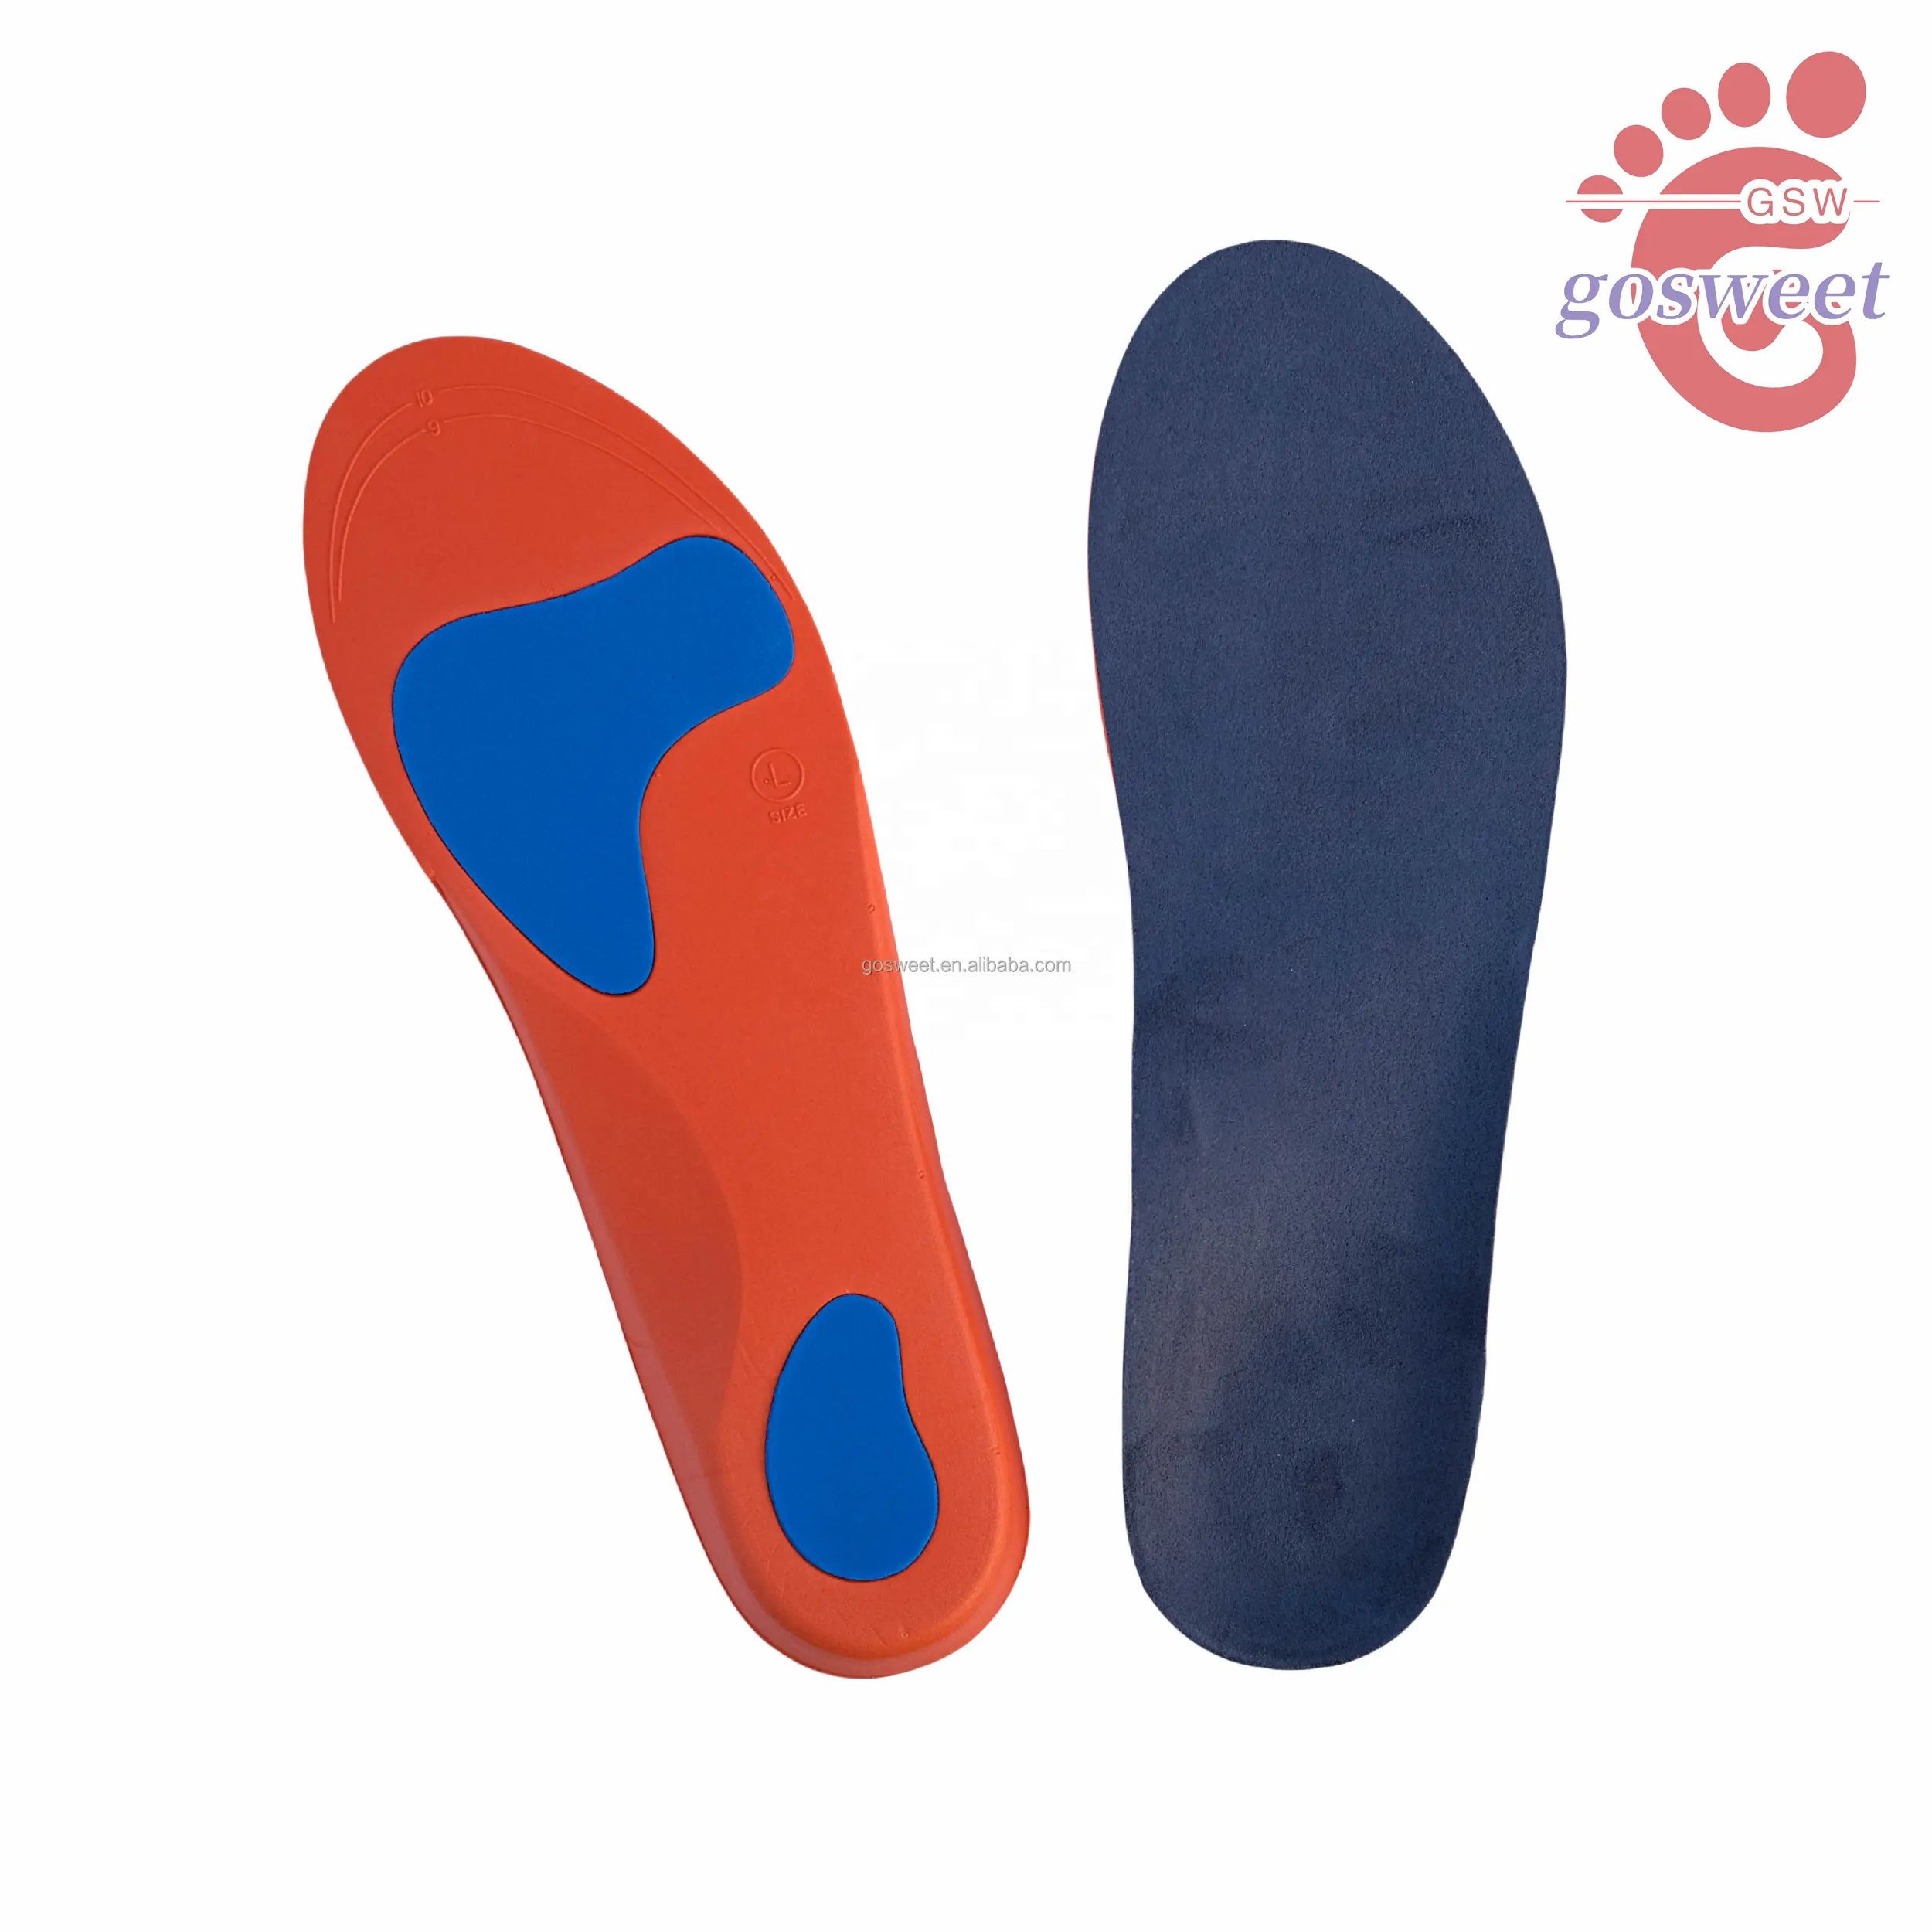 Arch correction insole with flat foot and high arch support EVA shock absorption insole for men and women